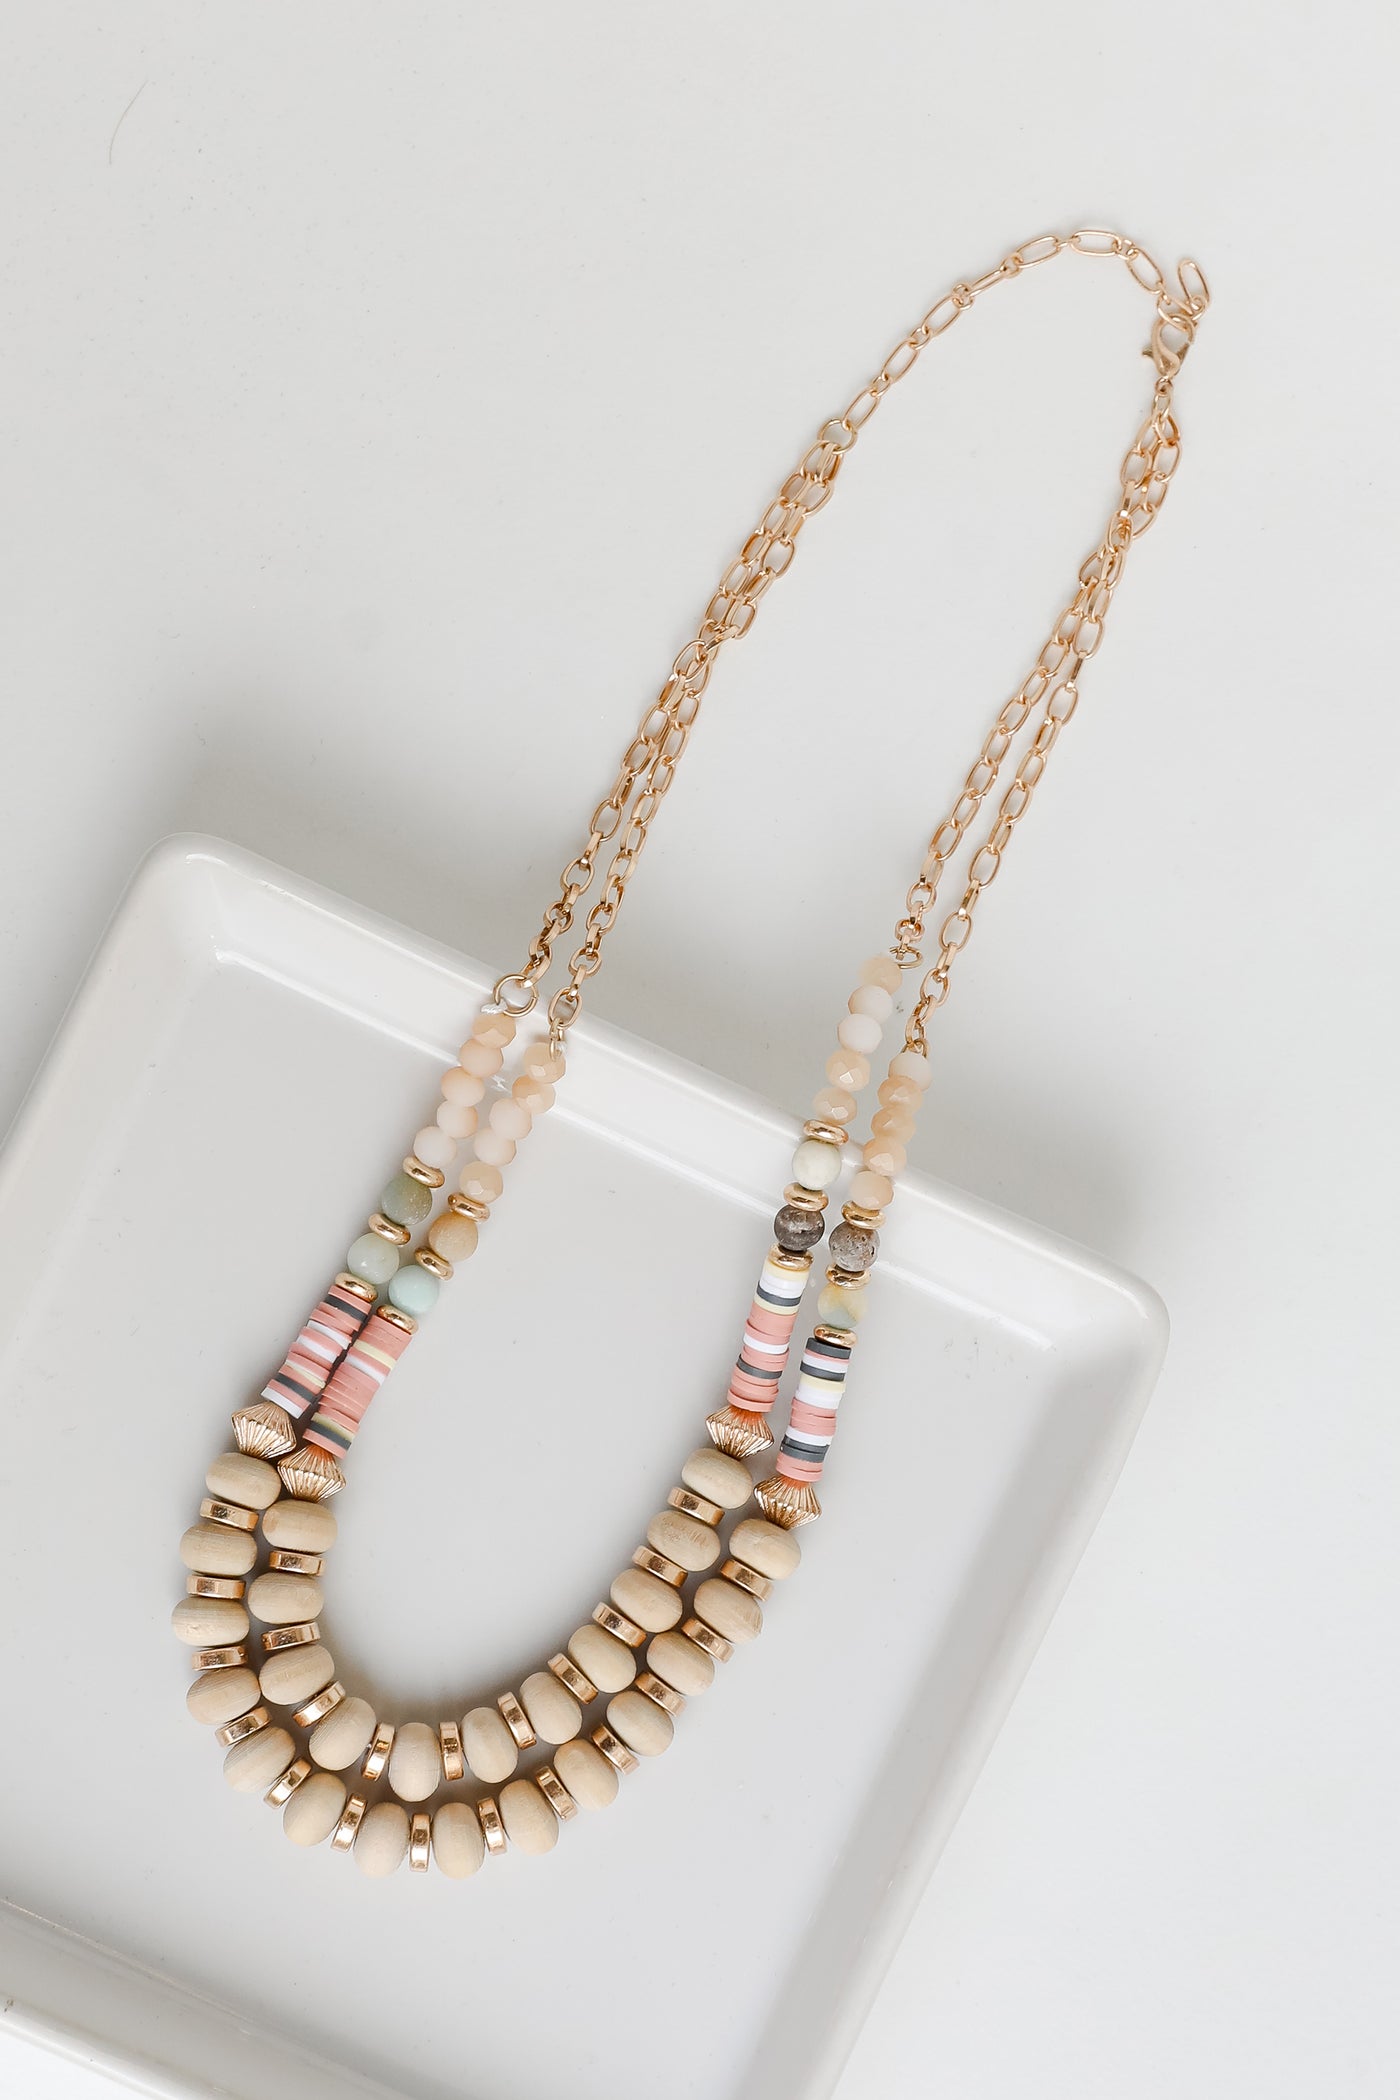 Beaded Necklace flat lay